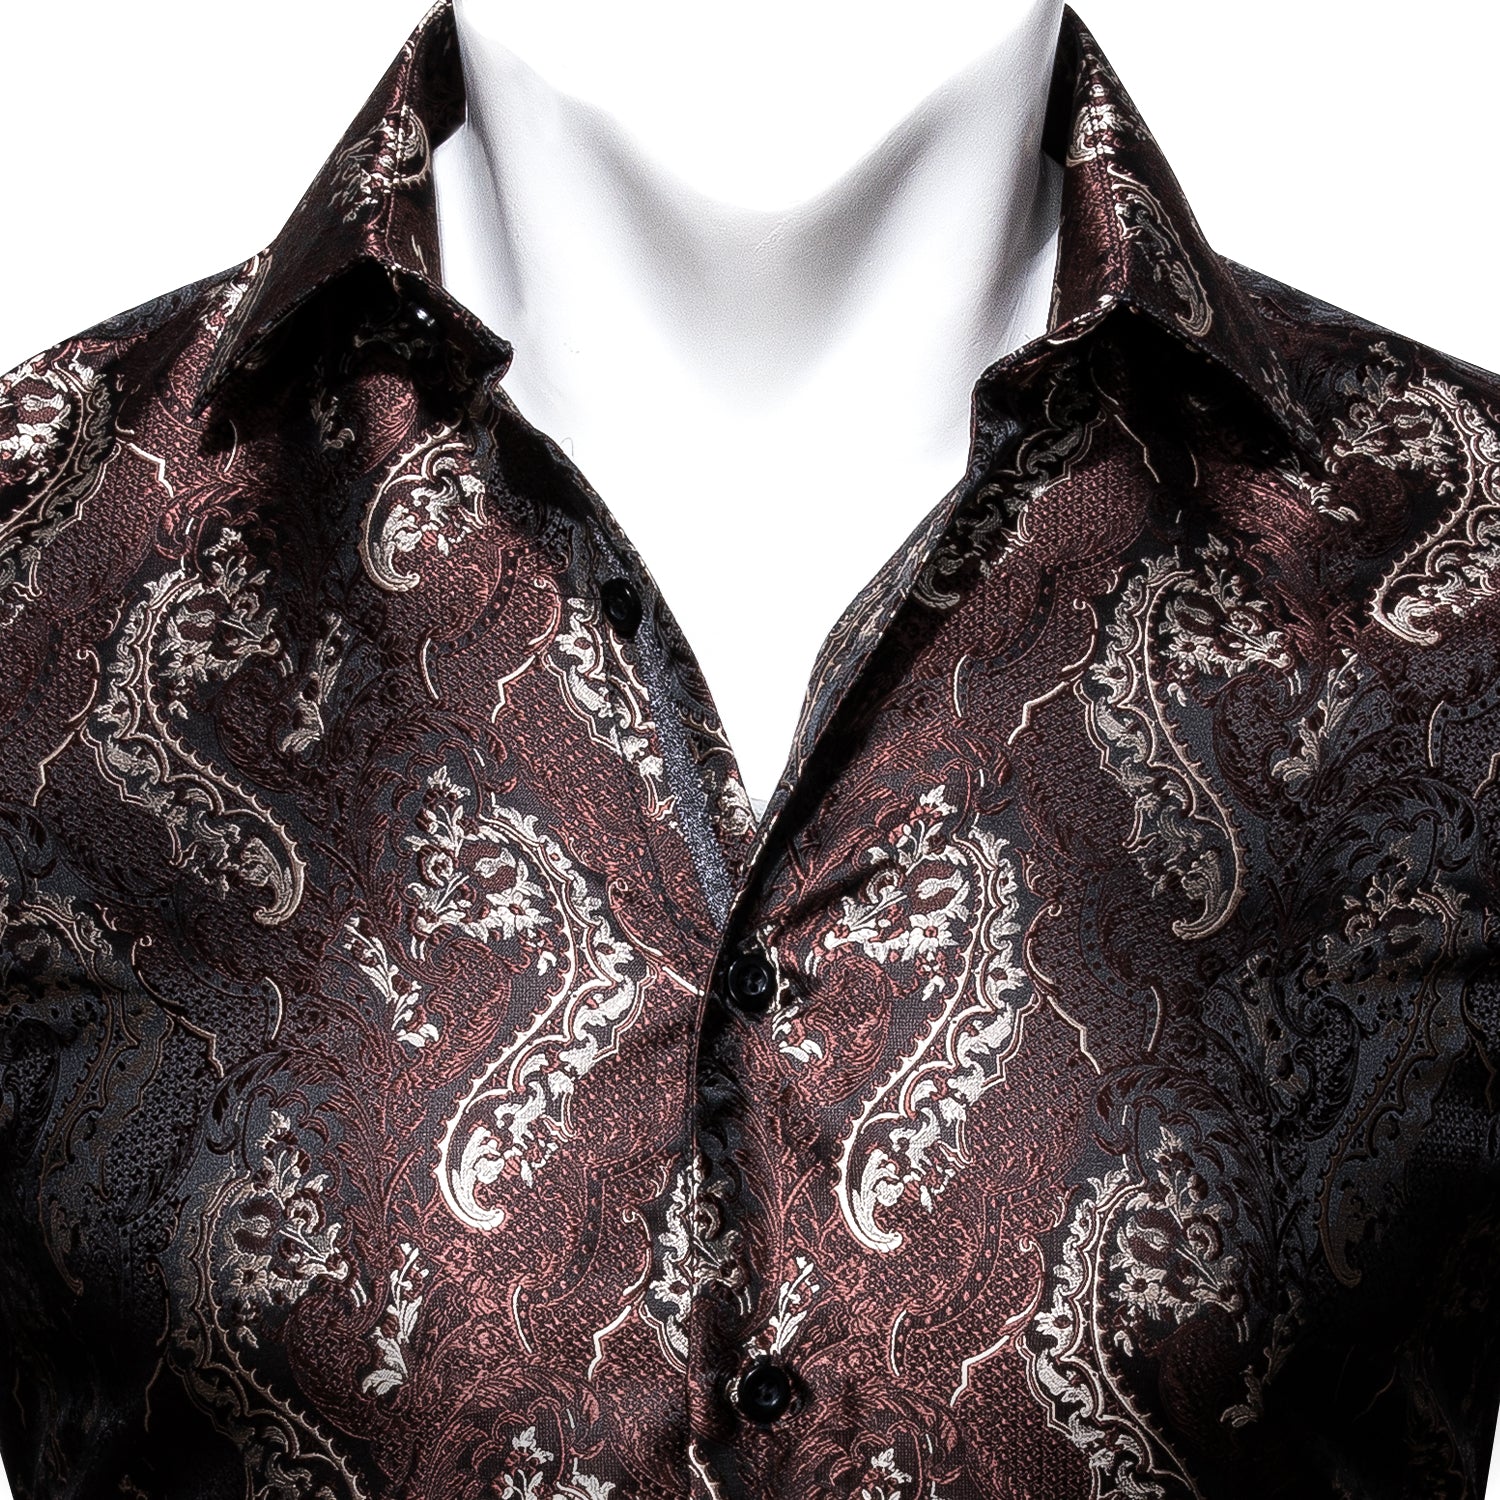 Barry.wang New Red Brown Silk Paisley Tribal Long Sleeve Daily Slim Fit Men's Shirt